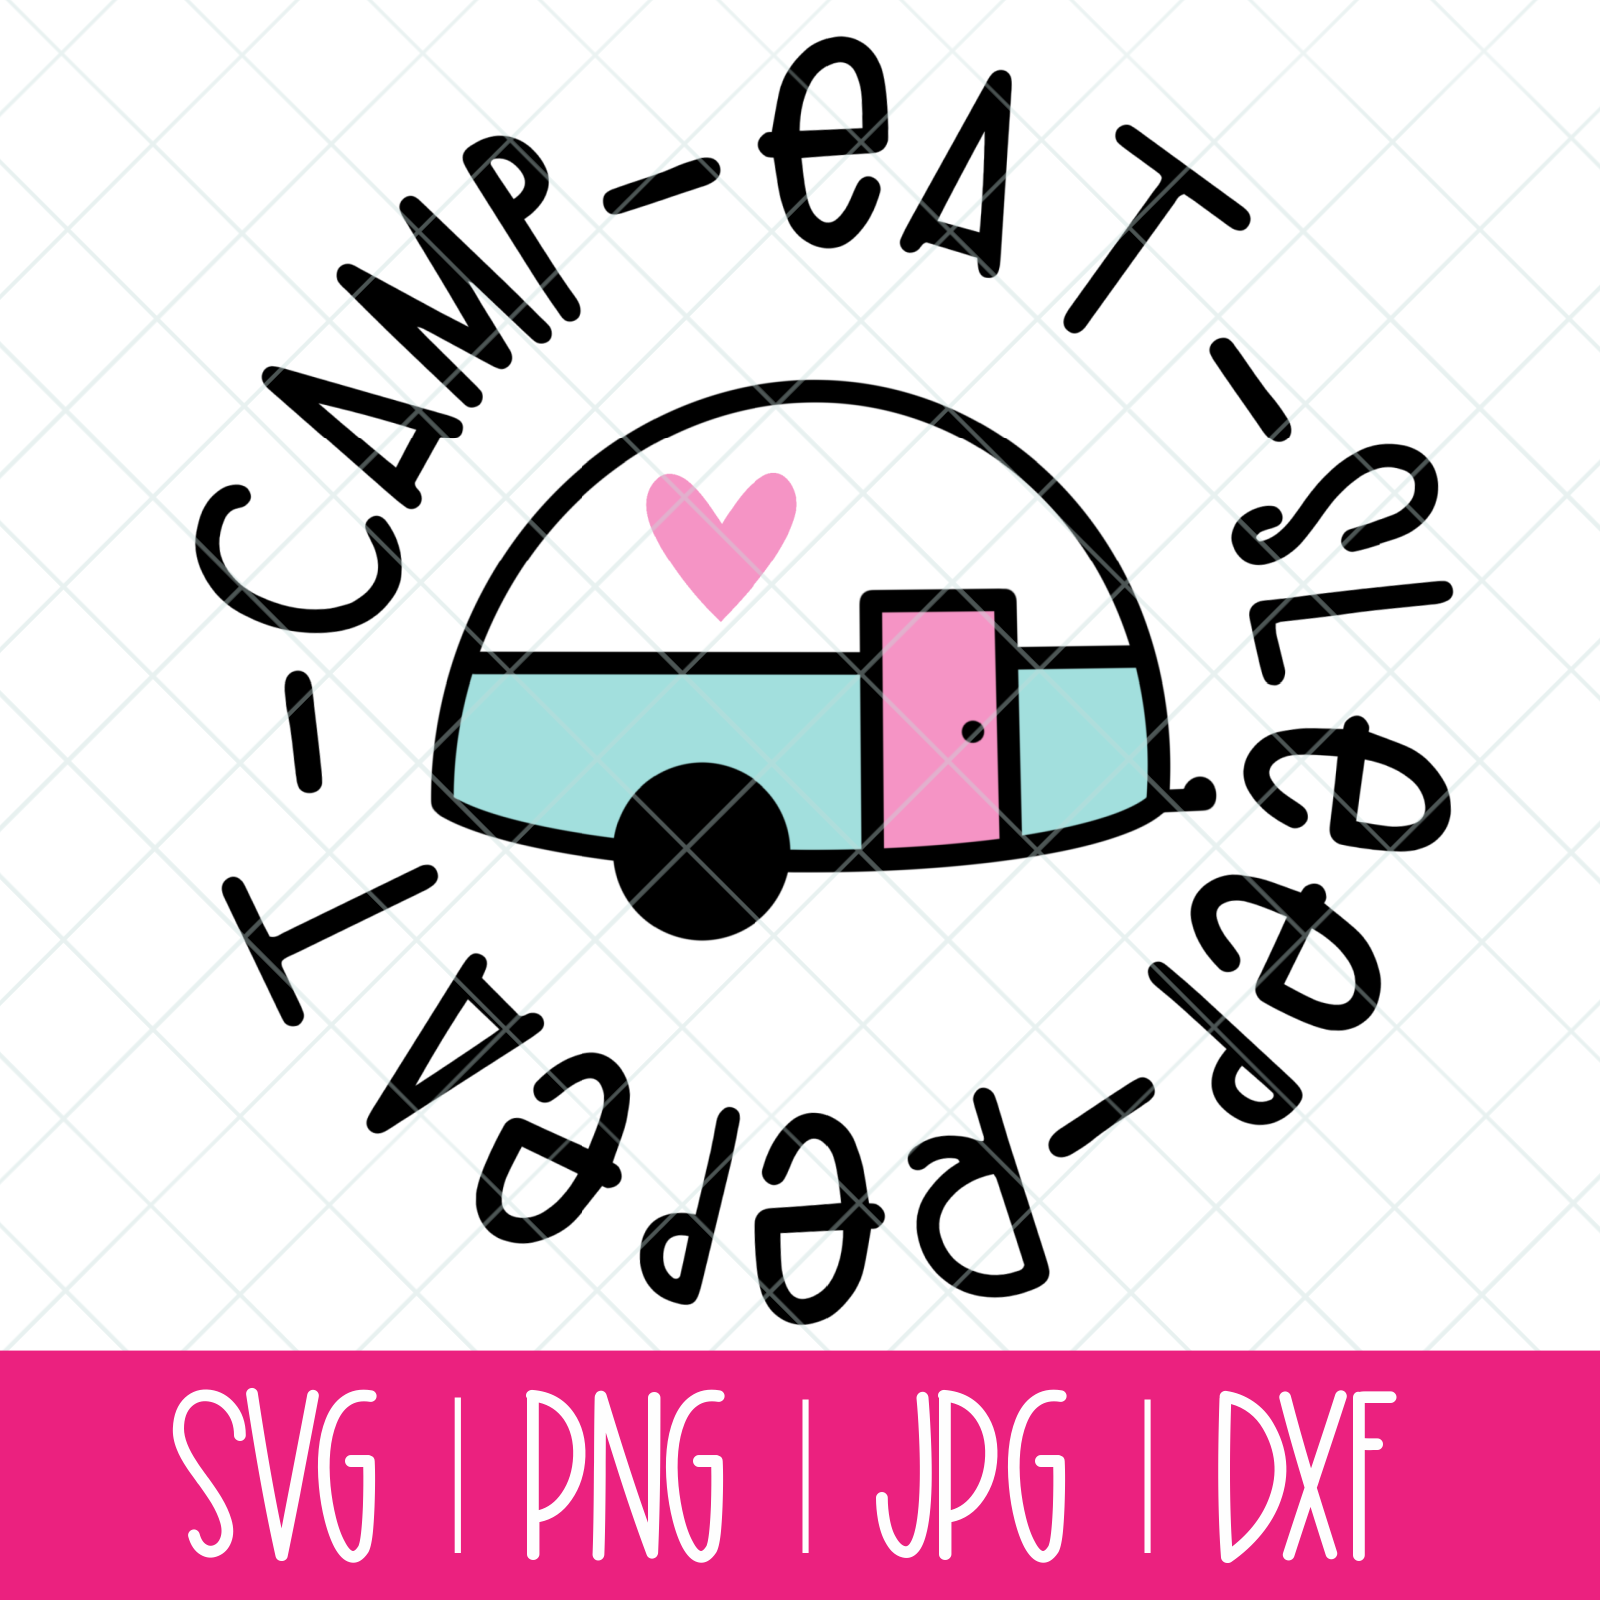 Download Camp Eat Sleep Repeat Cut Files With Cute Vintage Trailer